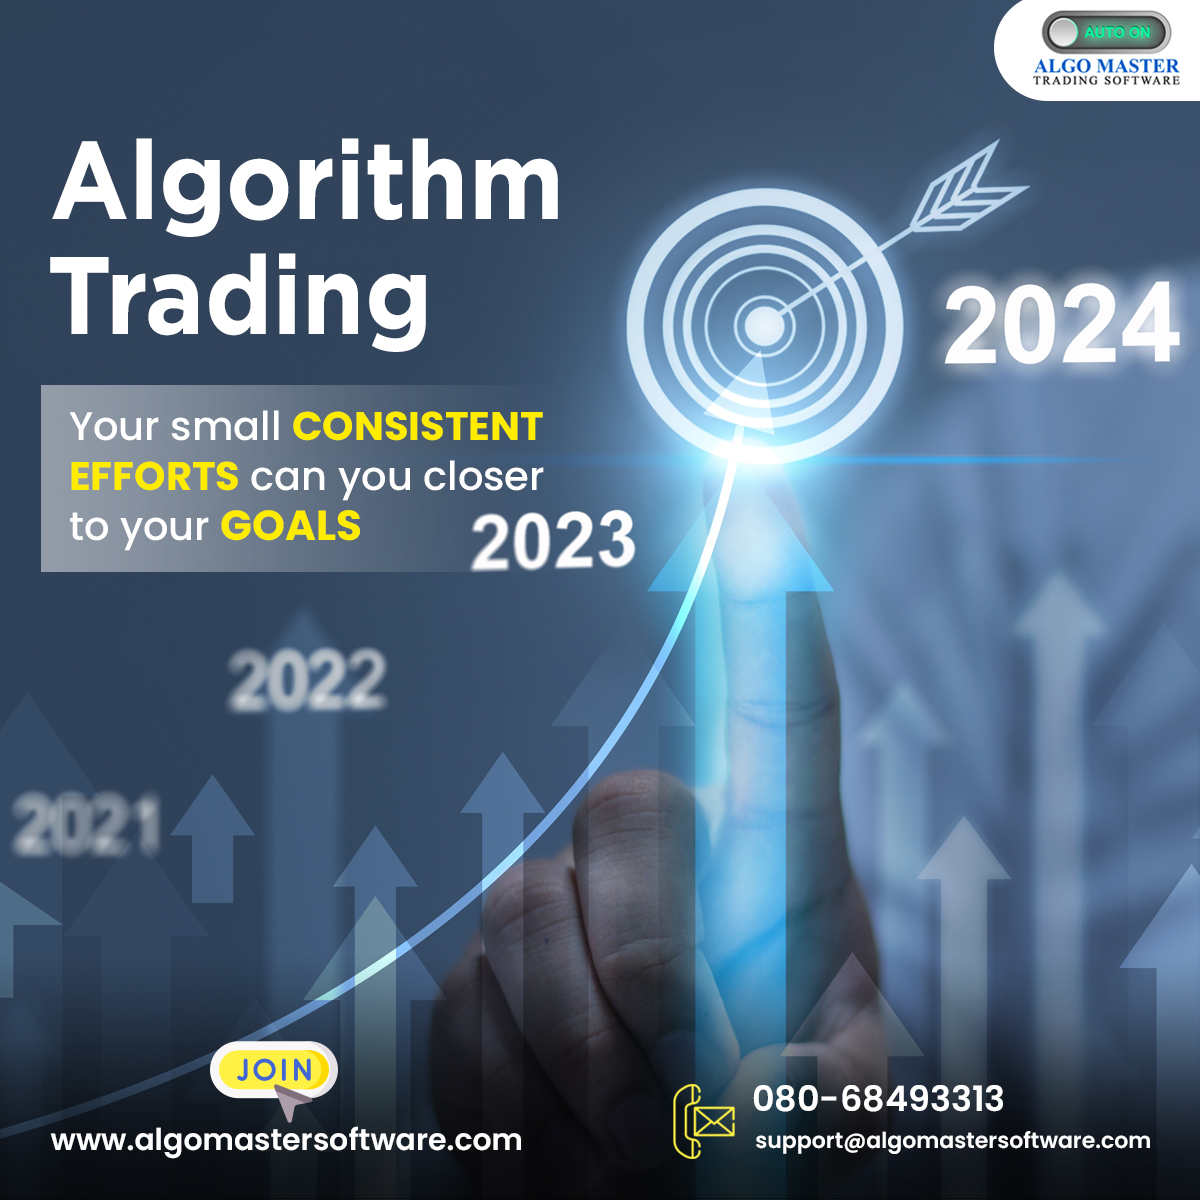 Algorithmic trading is a powerful tool that can propel you steadily towards your financial goals.
To learn more today! Visit
Website: algomastersoftware.com/stock-trading-…
Contact us at: 080-68493313
Please email us at: india@algomastersoftware.com
#AutomatedTrading #ManualTrading